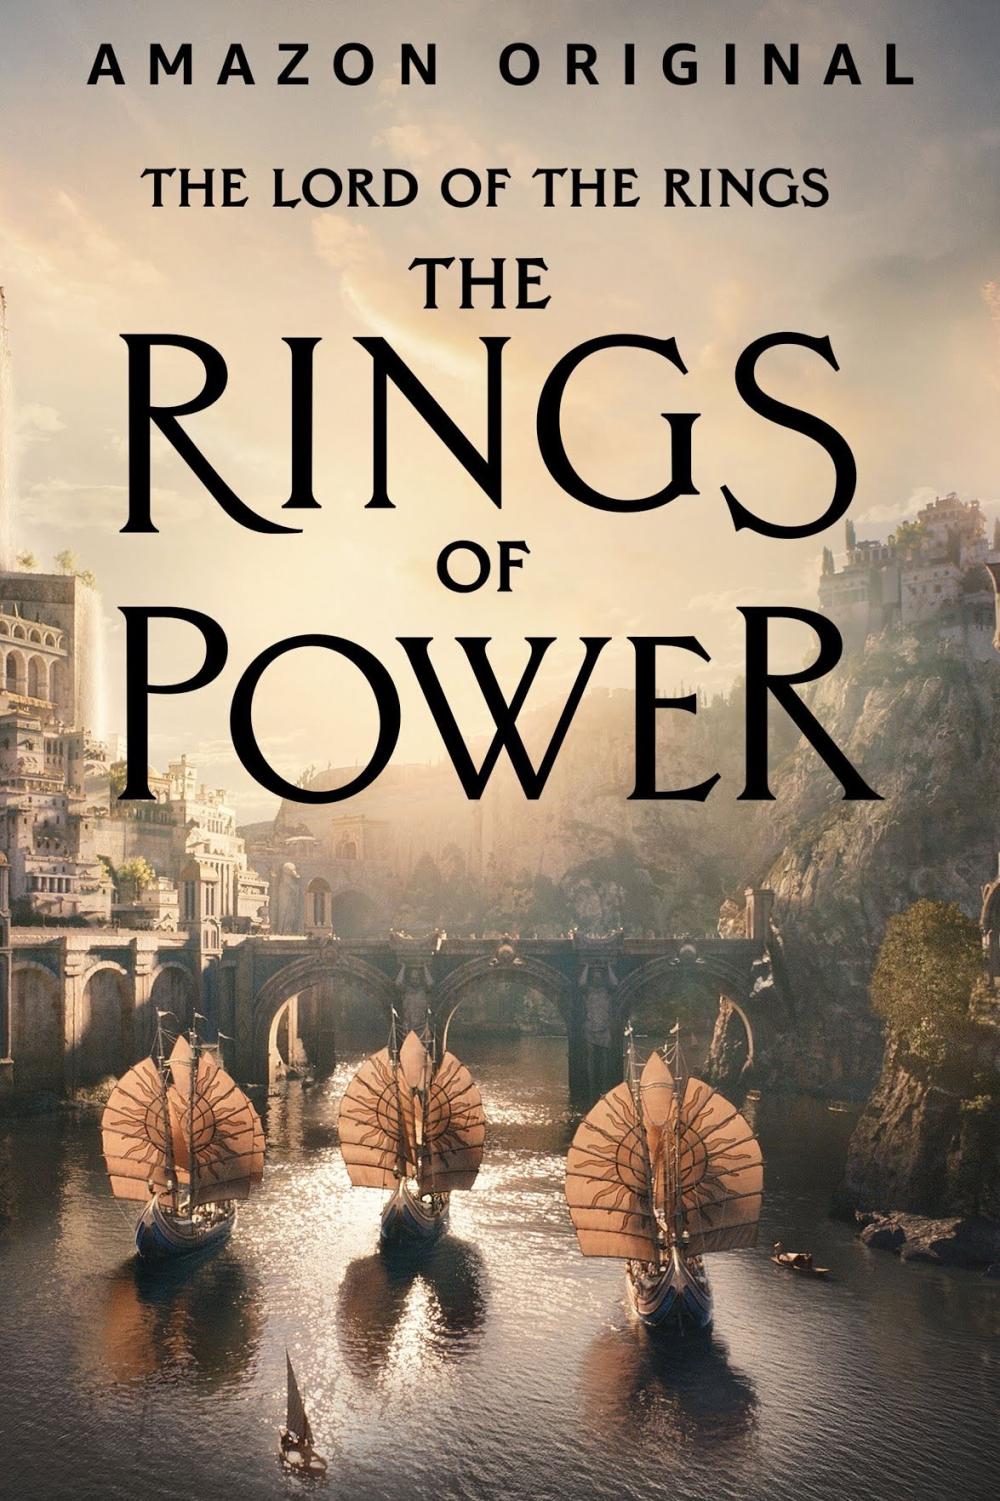 Hobbit-Sized Debut: Rings of Power Puts the Mid in Middle Earth